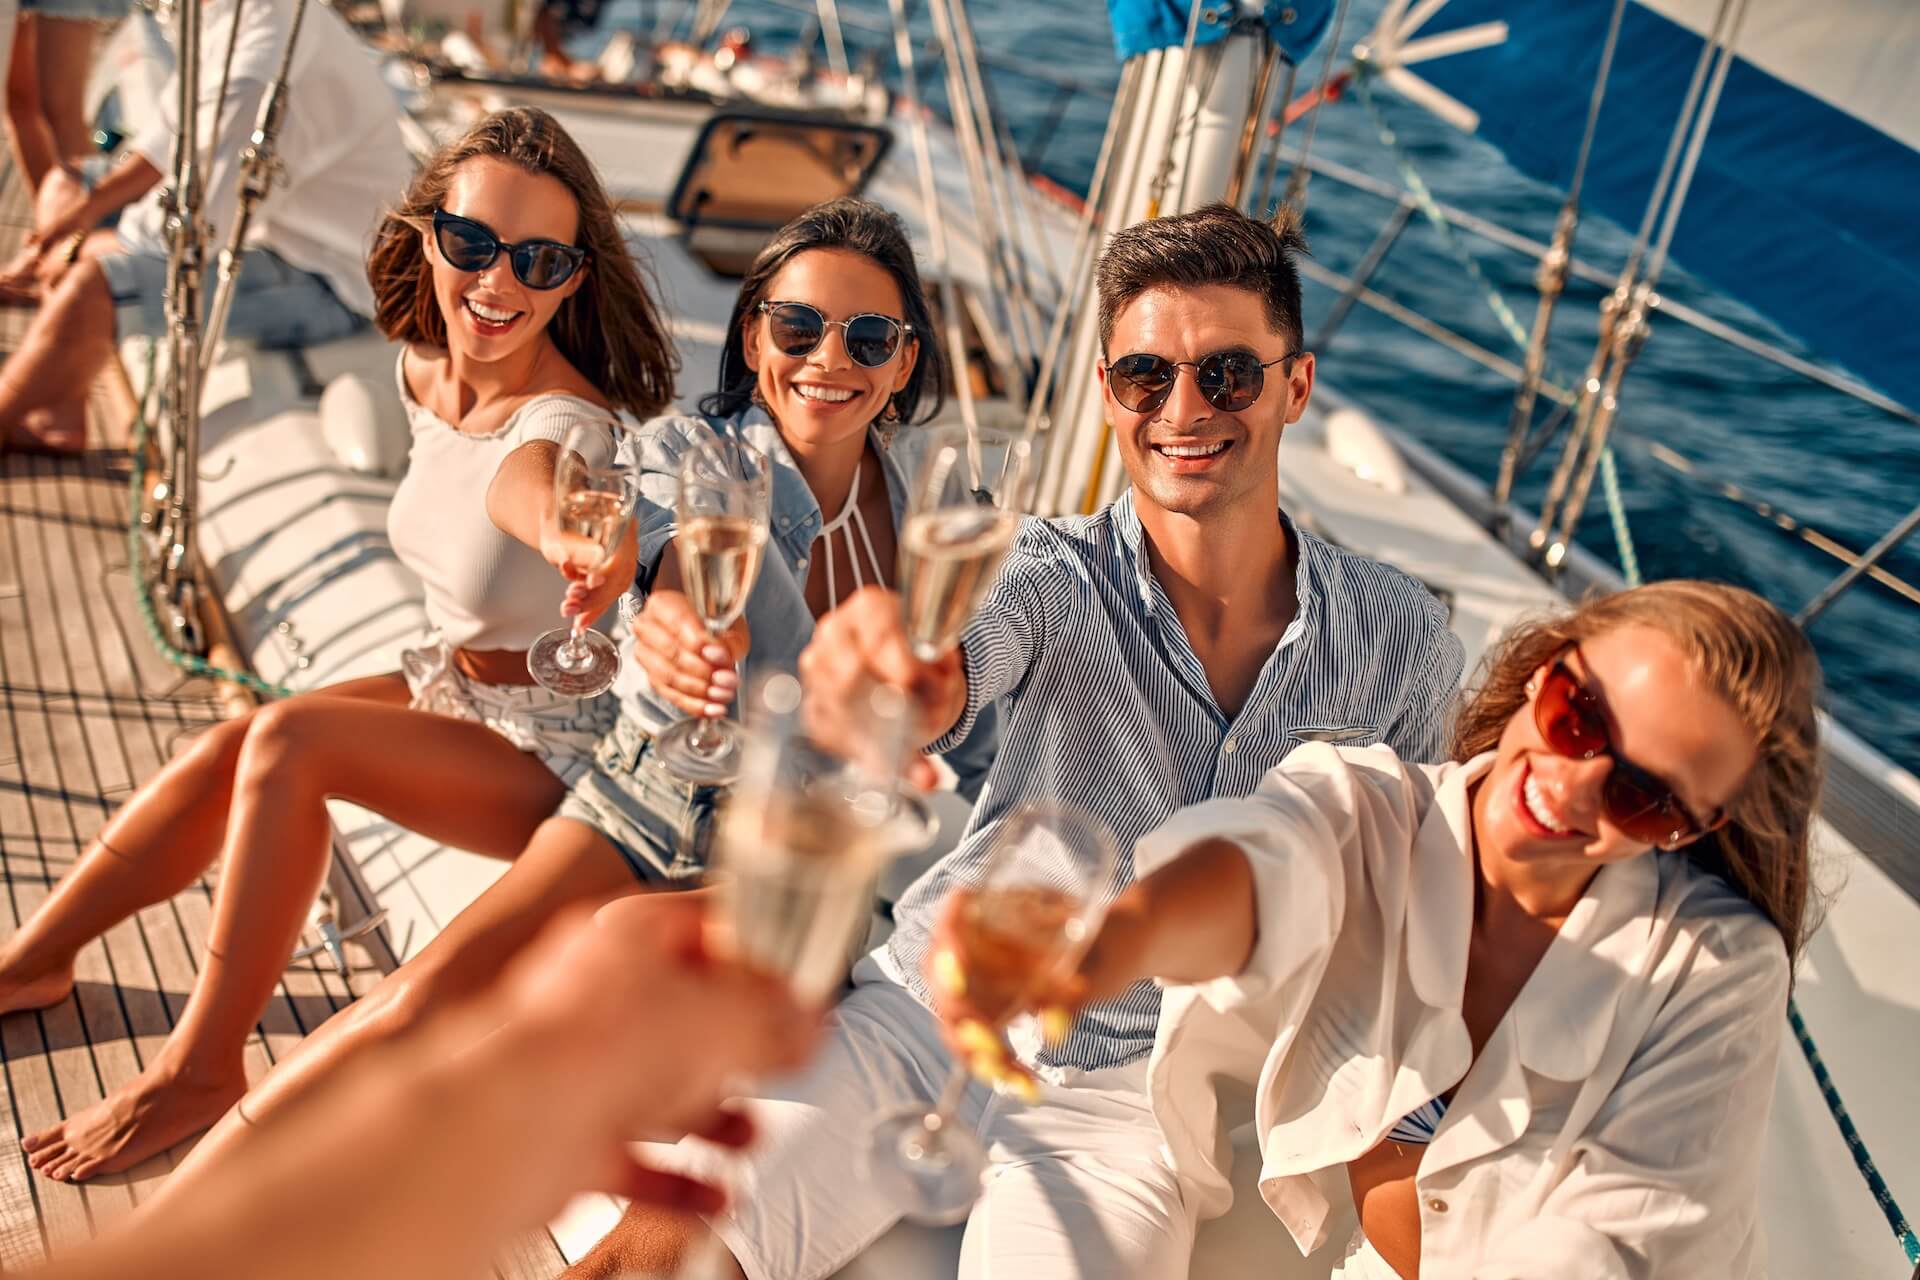 People drinking champagne on a boat